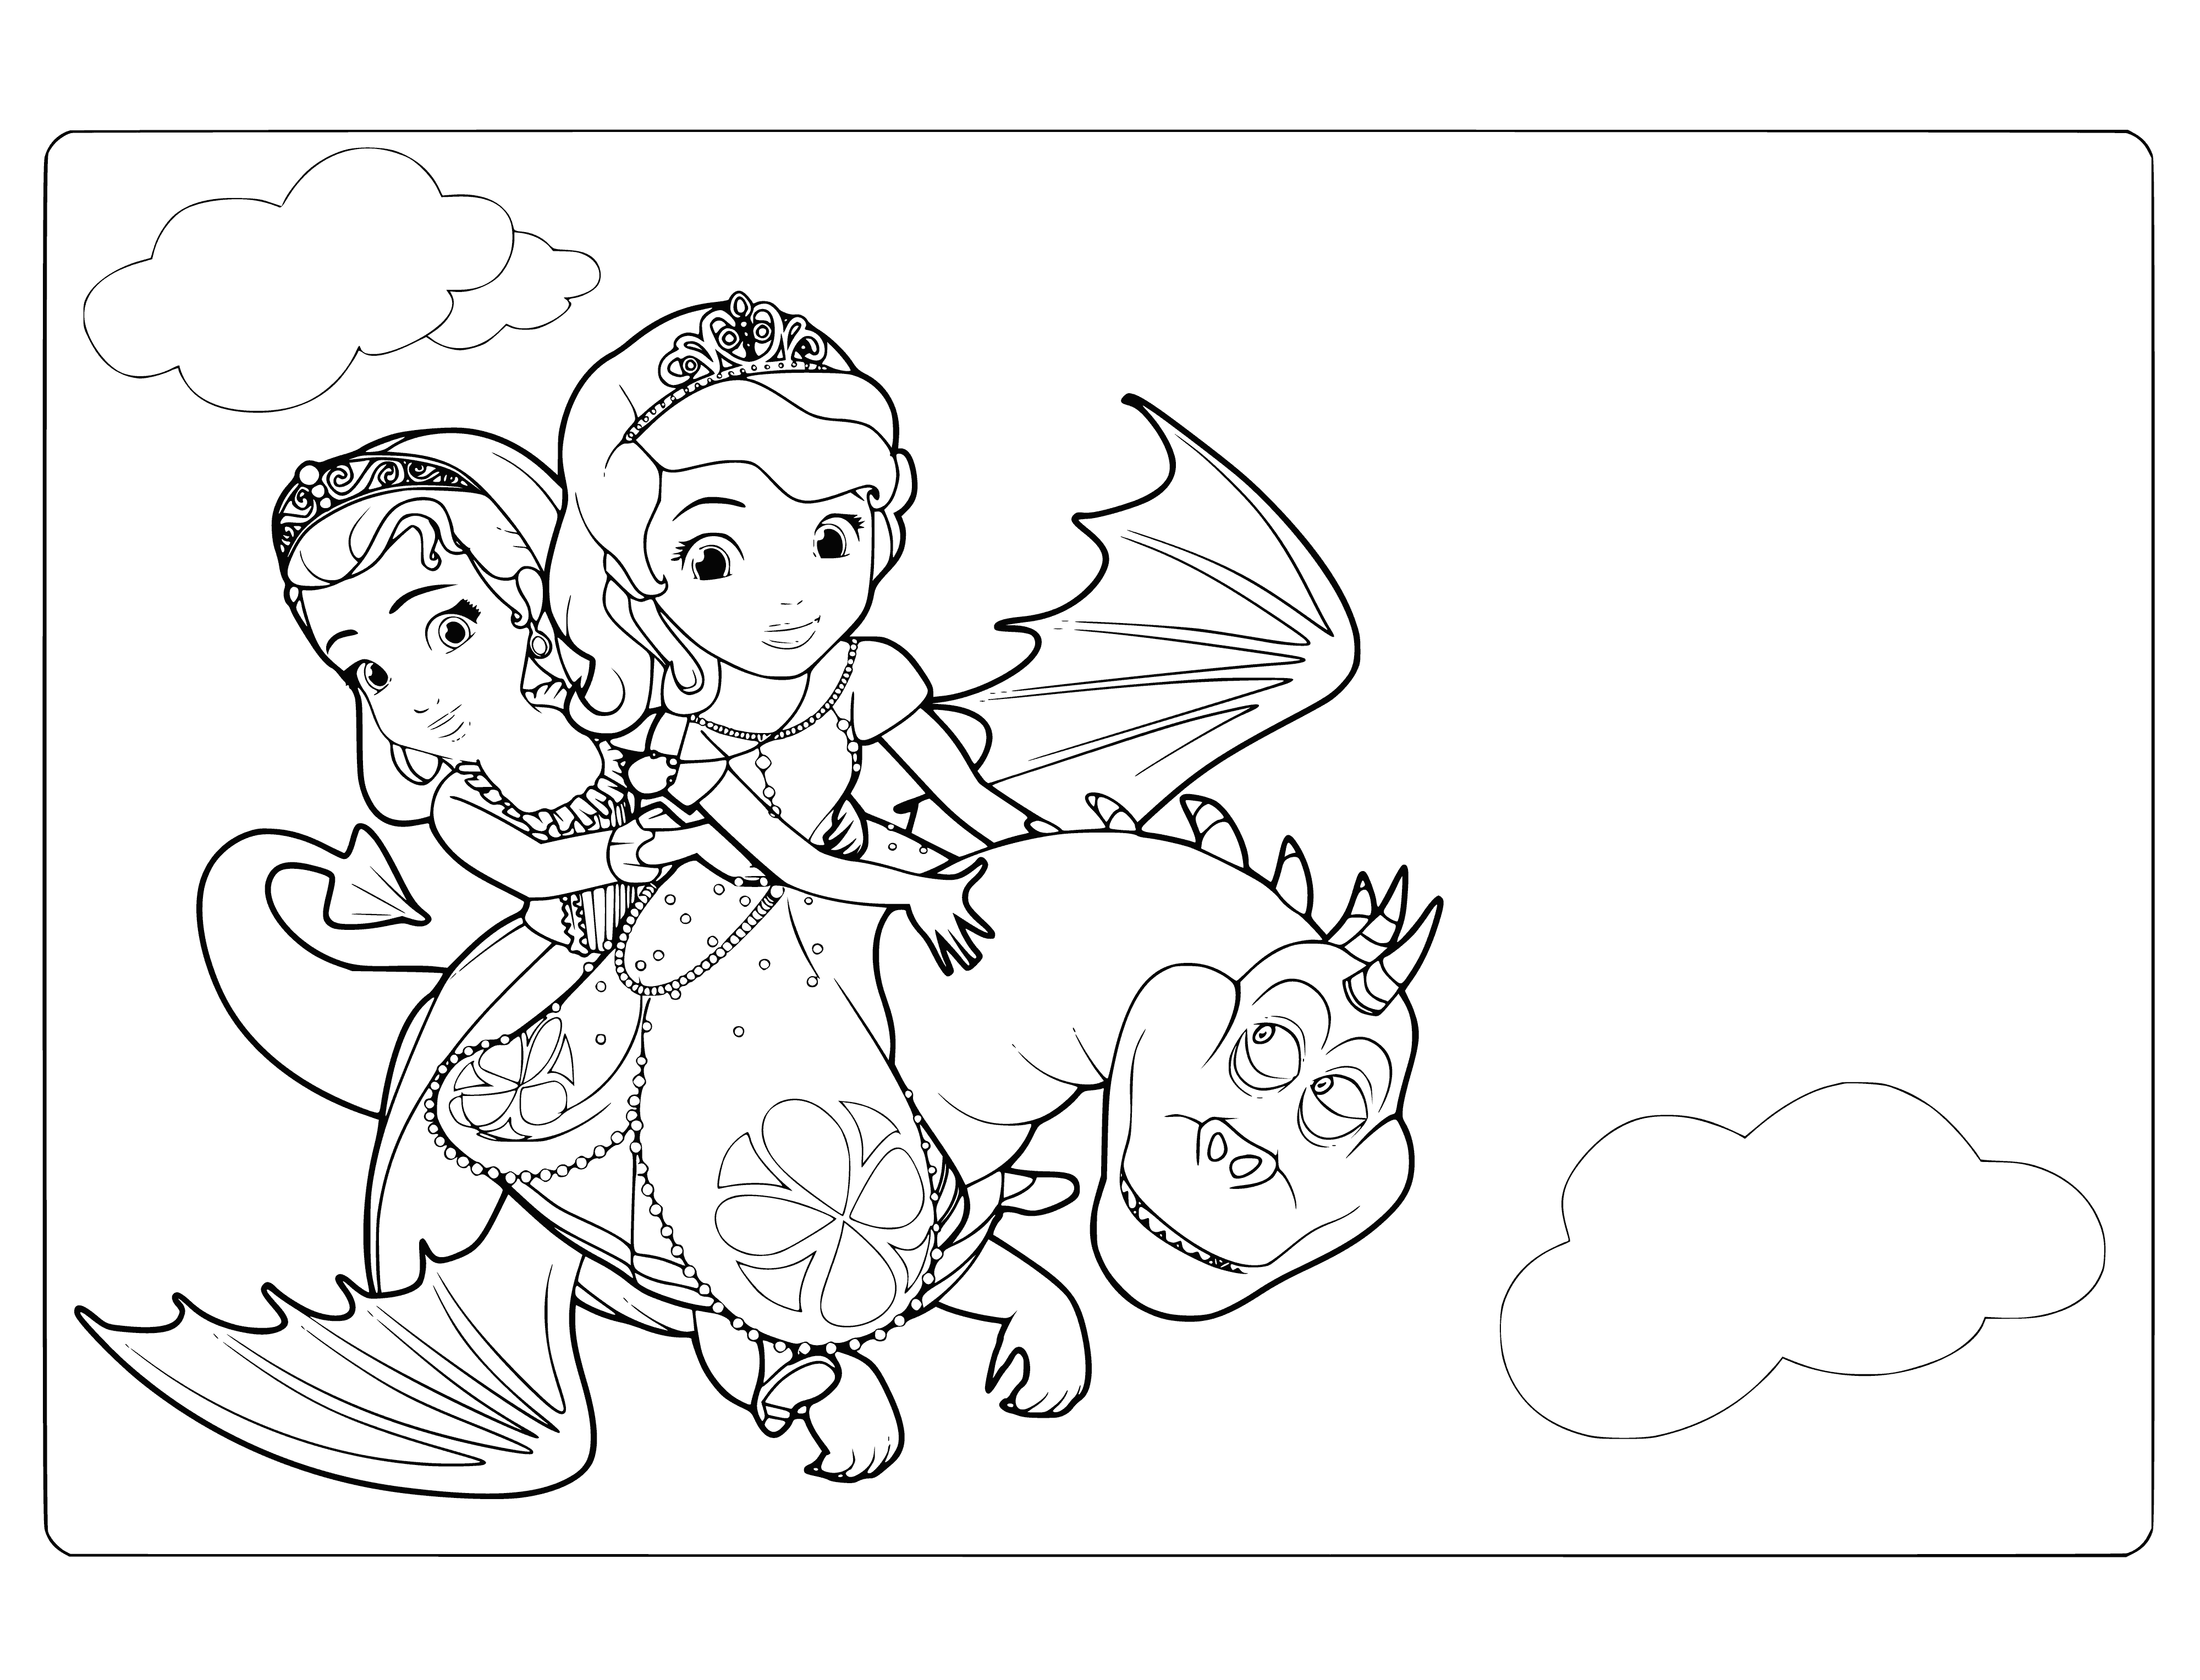 Sophia and Amber on the dragon coloring page